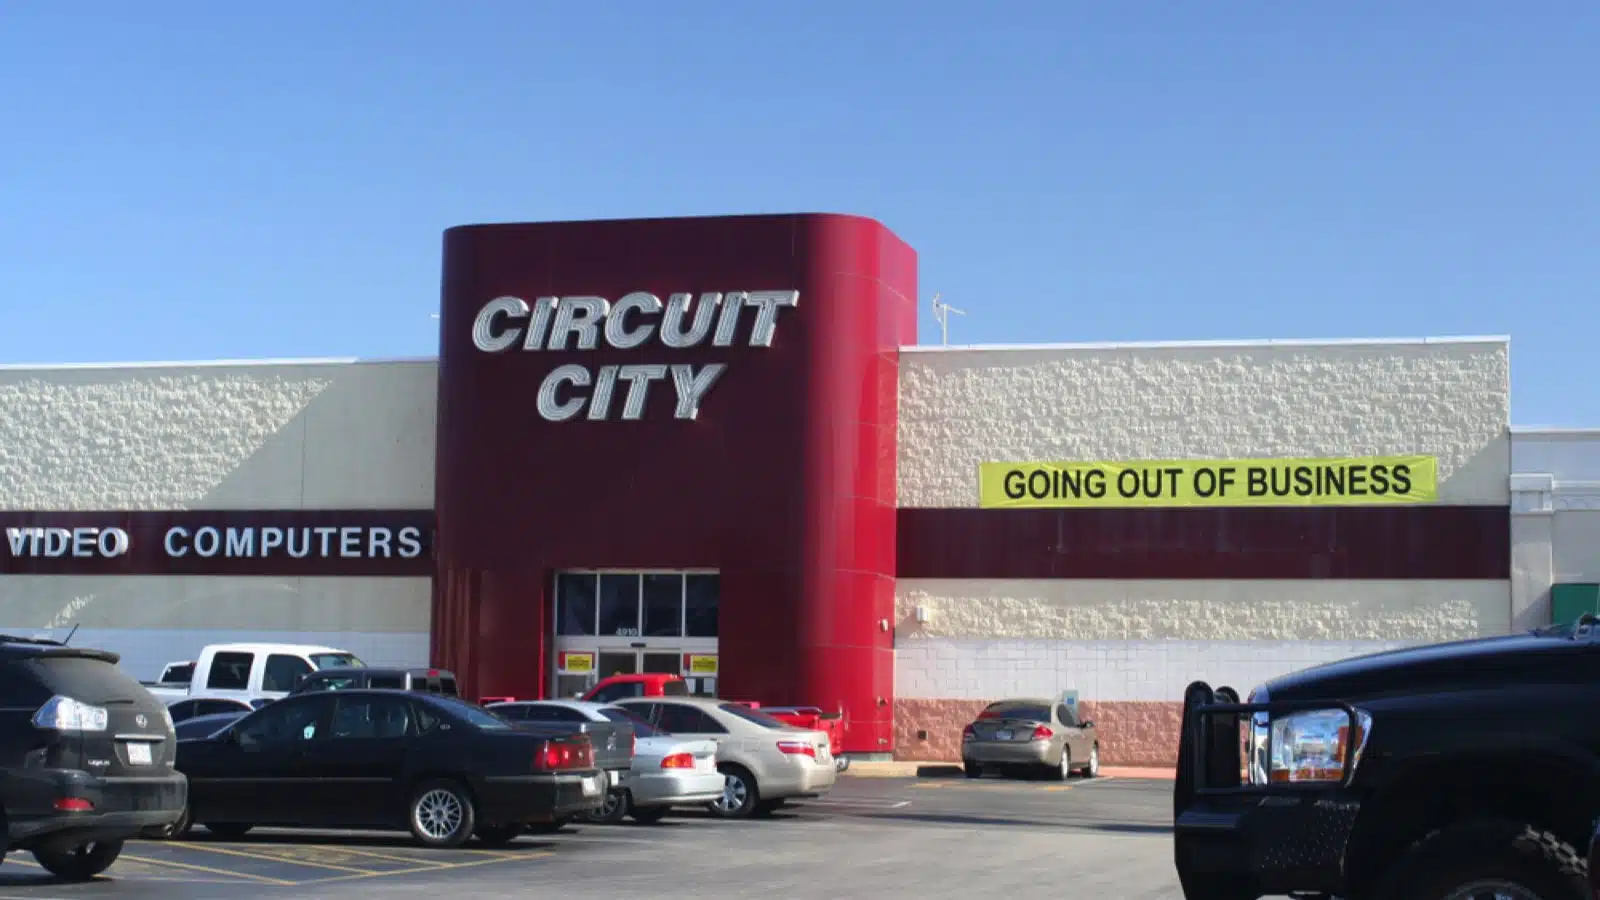 Tyler, TX - January 30, 2009: Circuit City Store with Going out of Business sign.